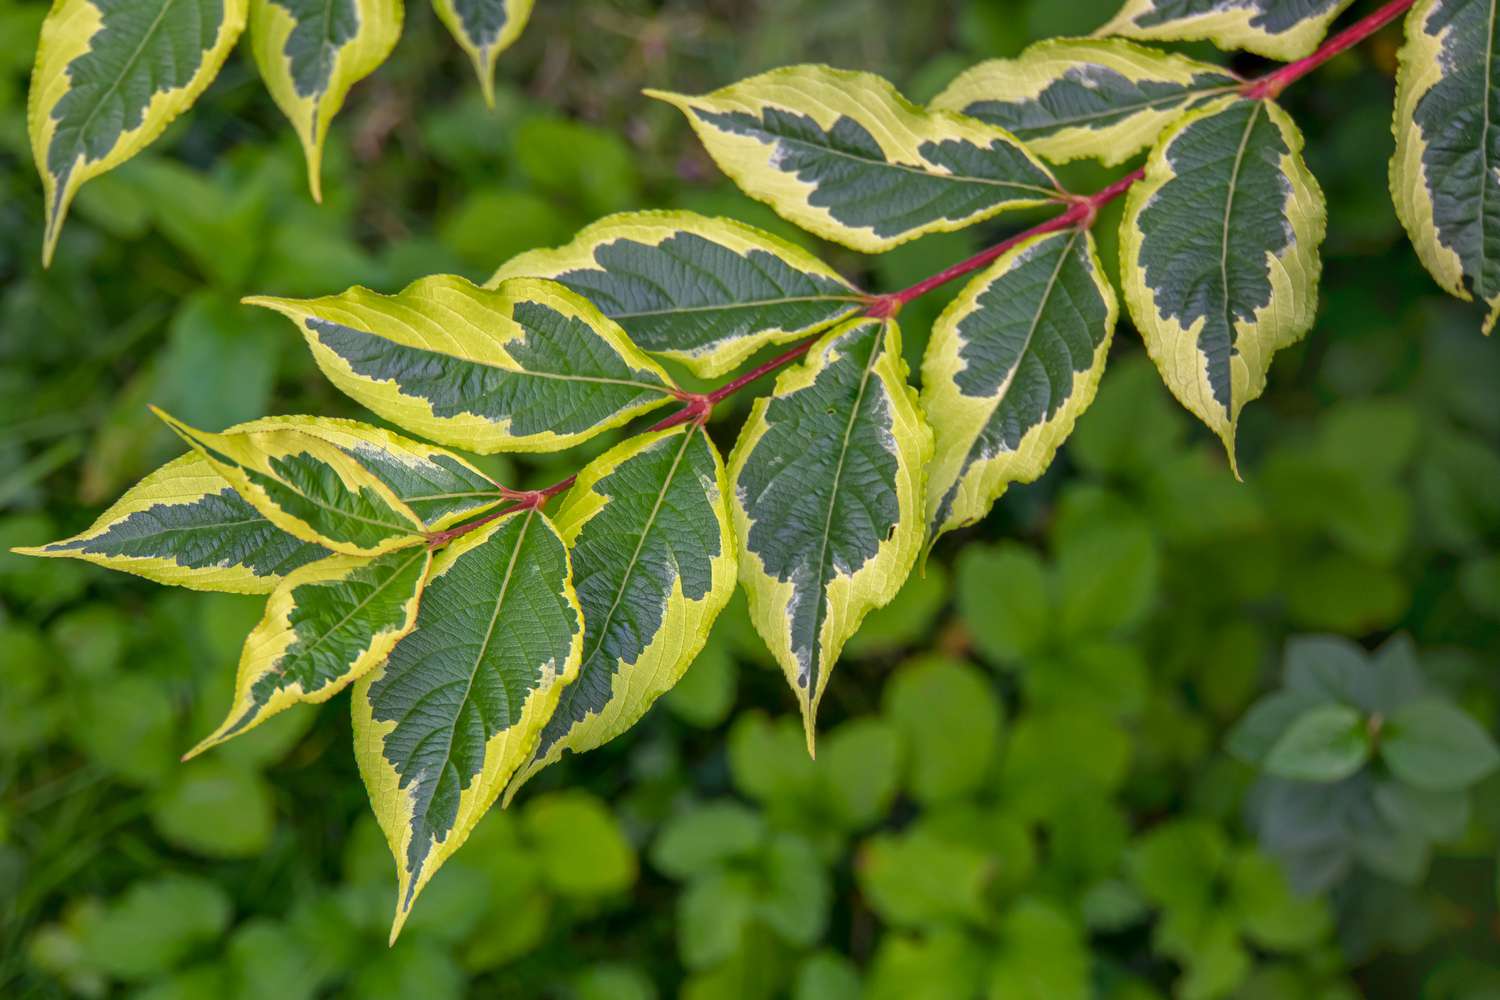 Weigela florida 'Variegata' plant with yellow-green and dark green leaves on red stem